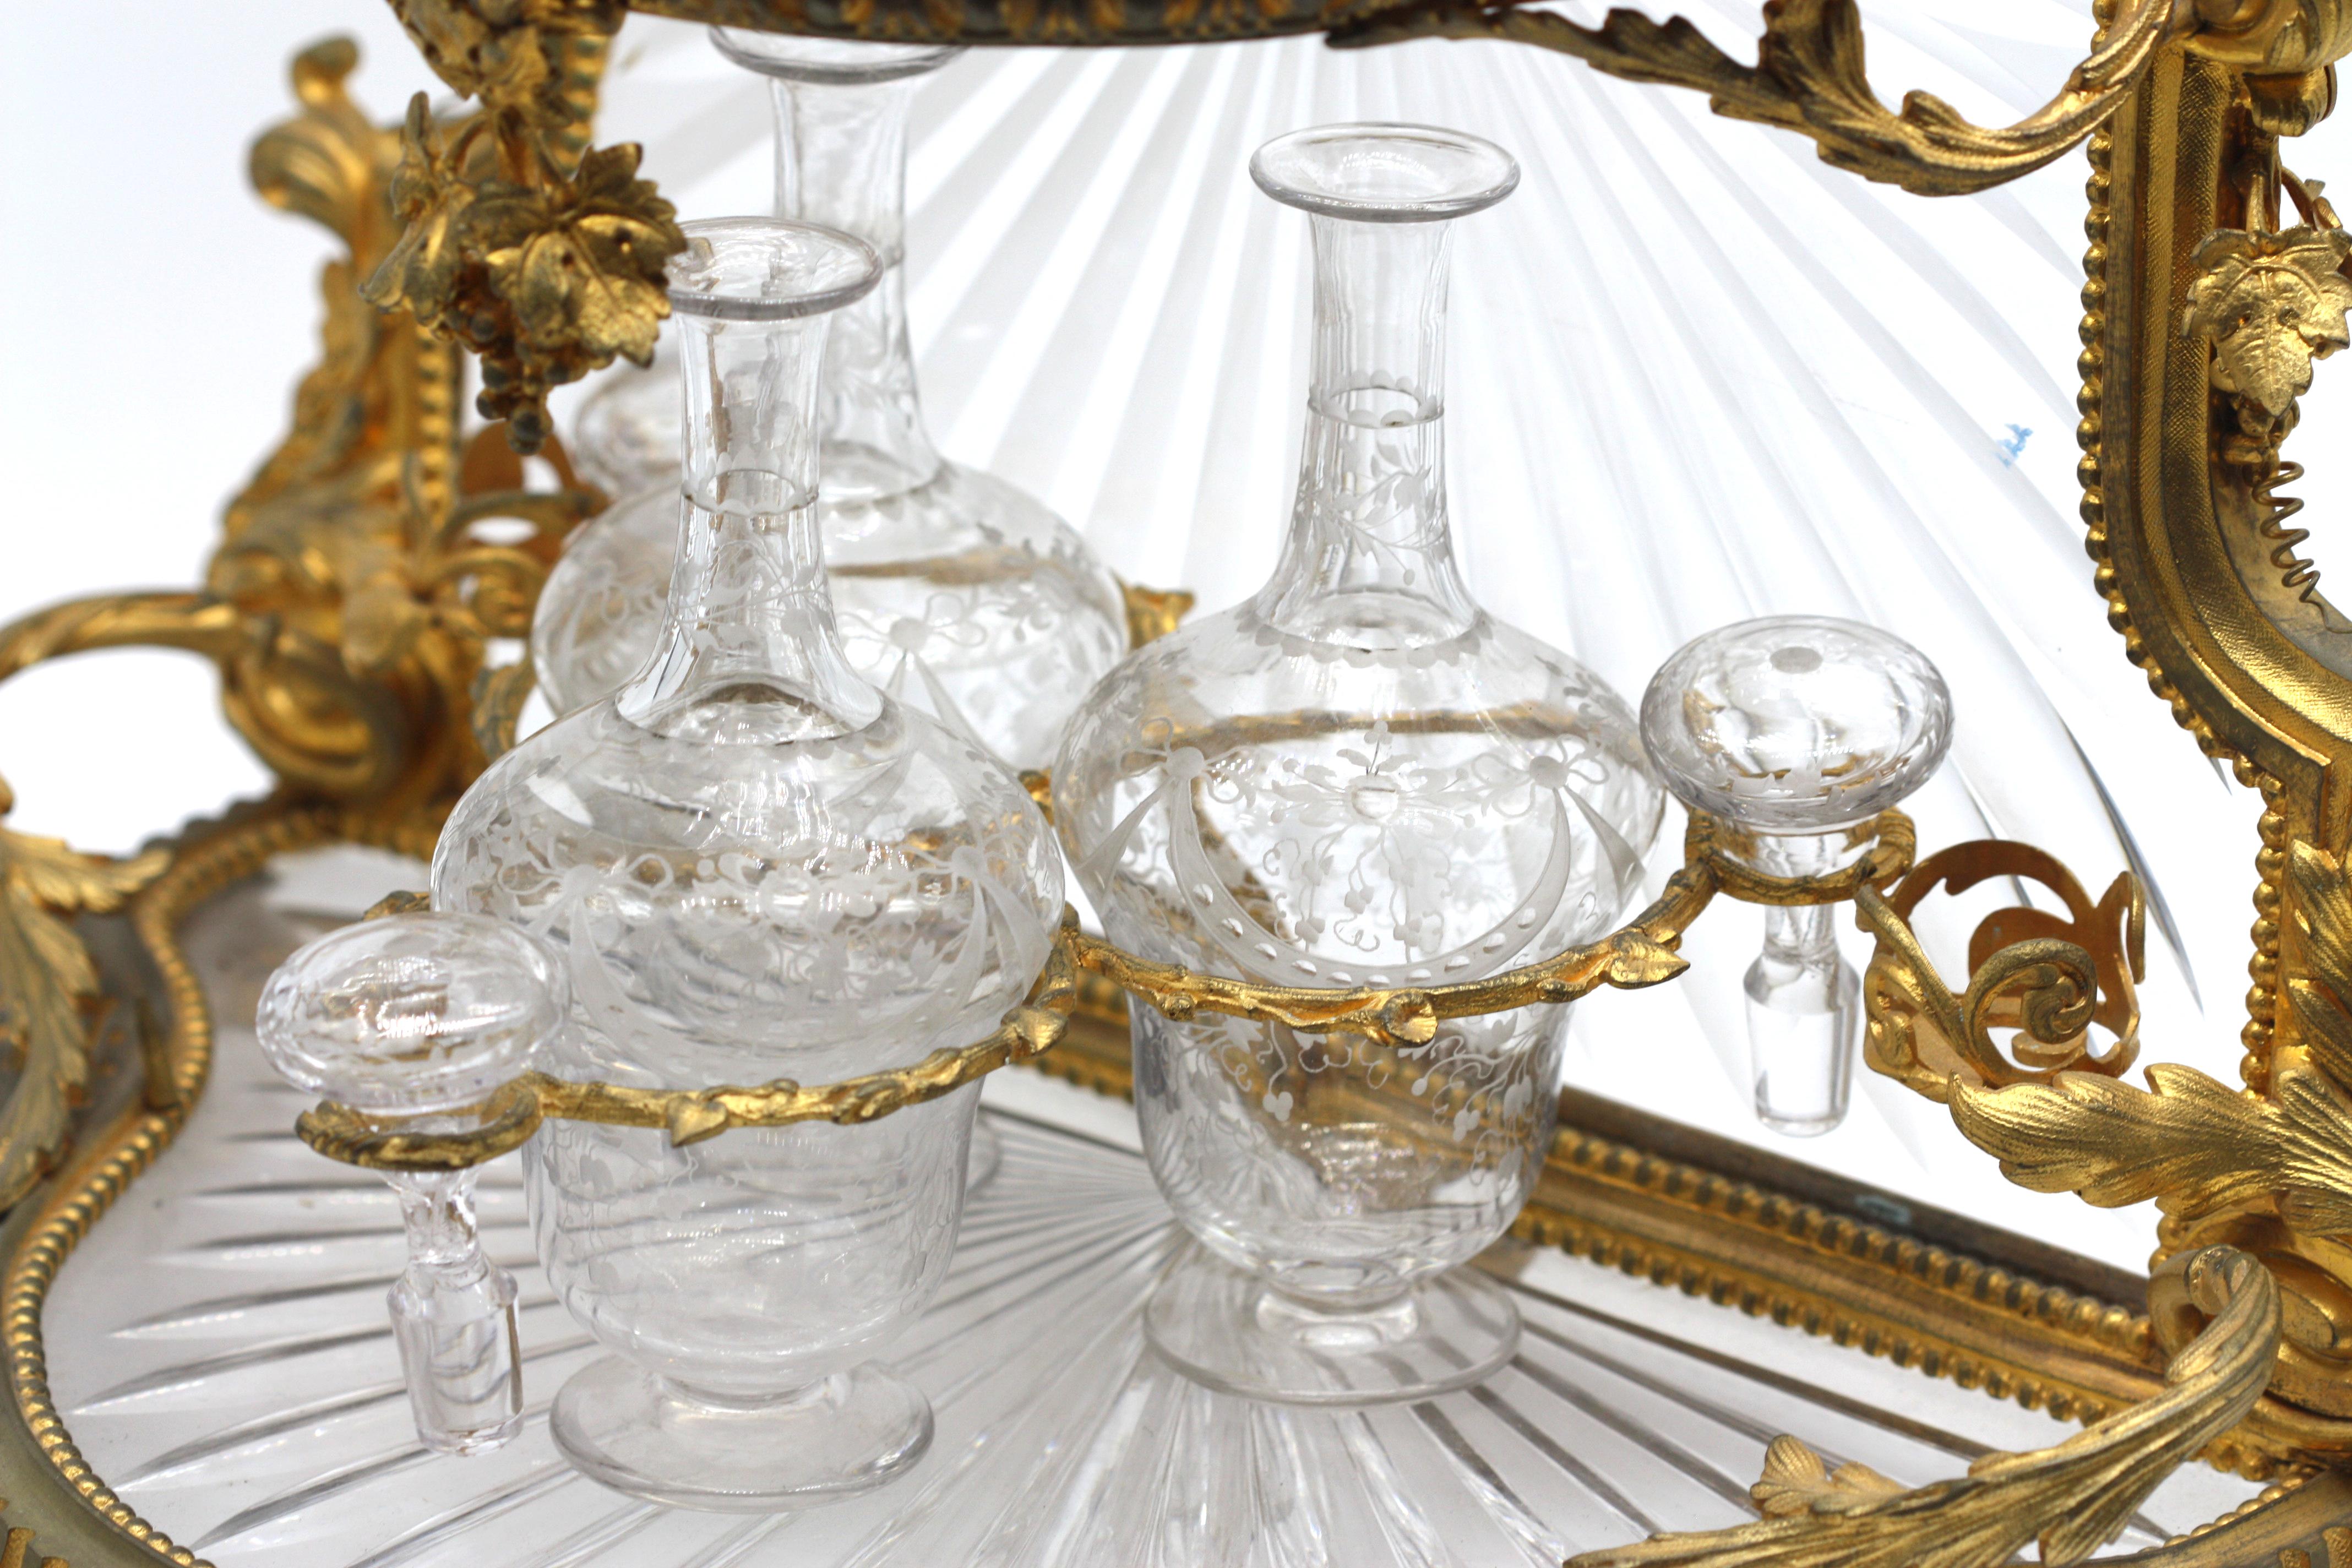 French Gilt Bronze and Cut-Glass Tiered Liquor 'Tantalus' Set For Sale 2